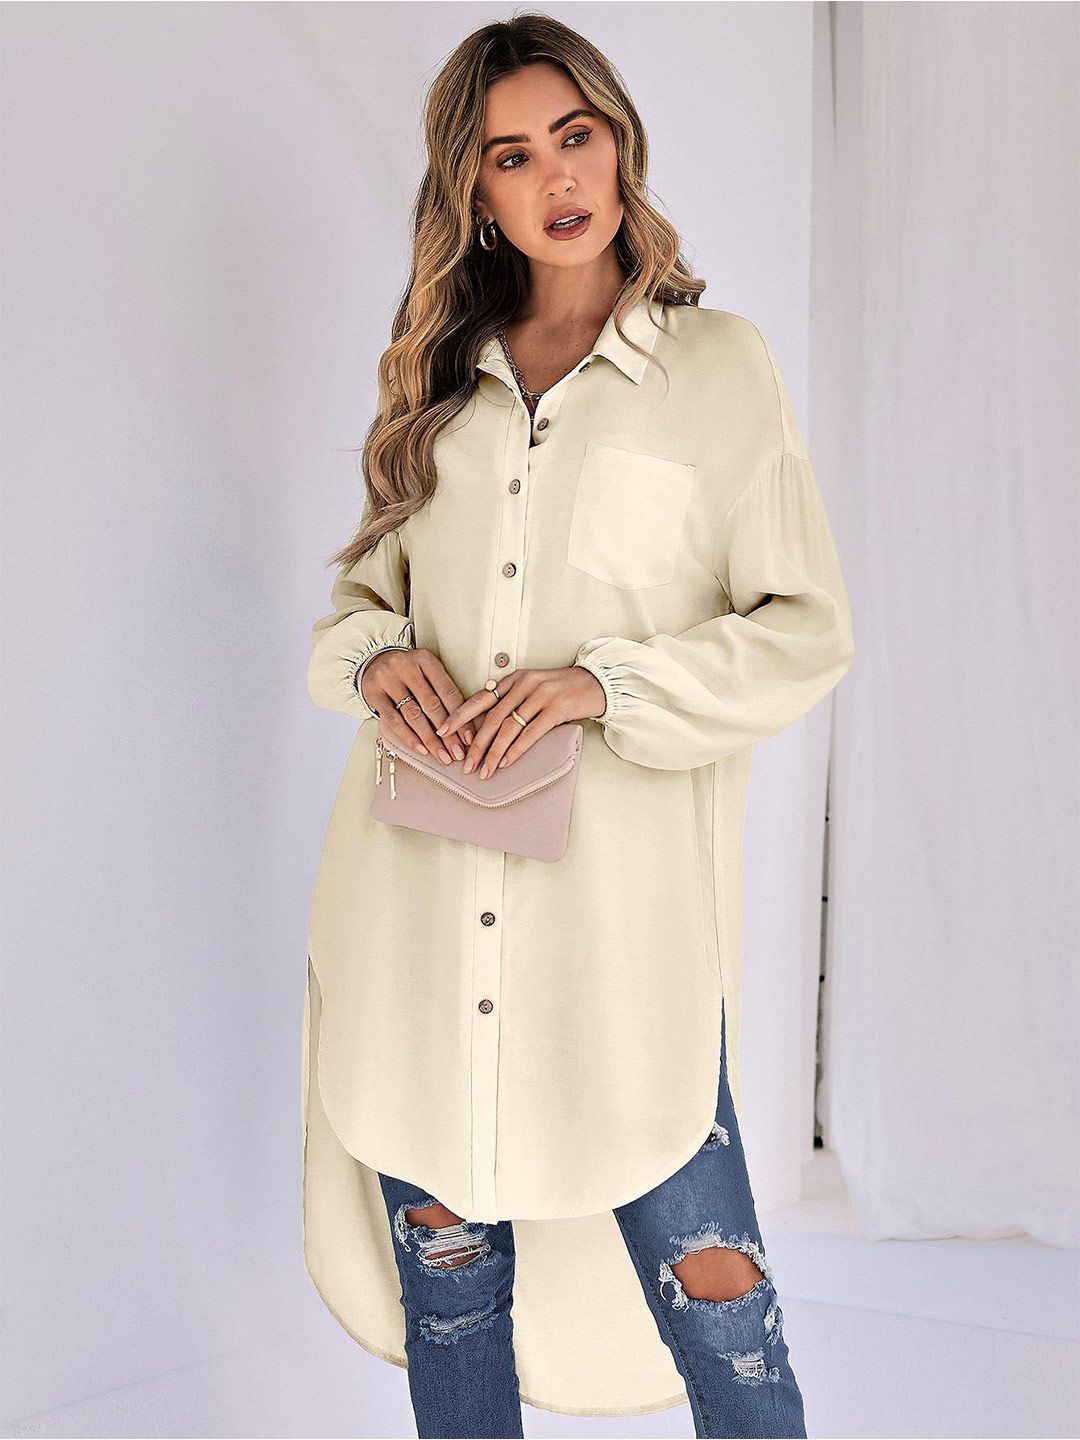 StyleCast Beige Shirt Style Longline Top Price in India